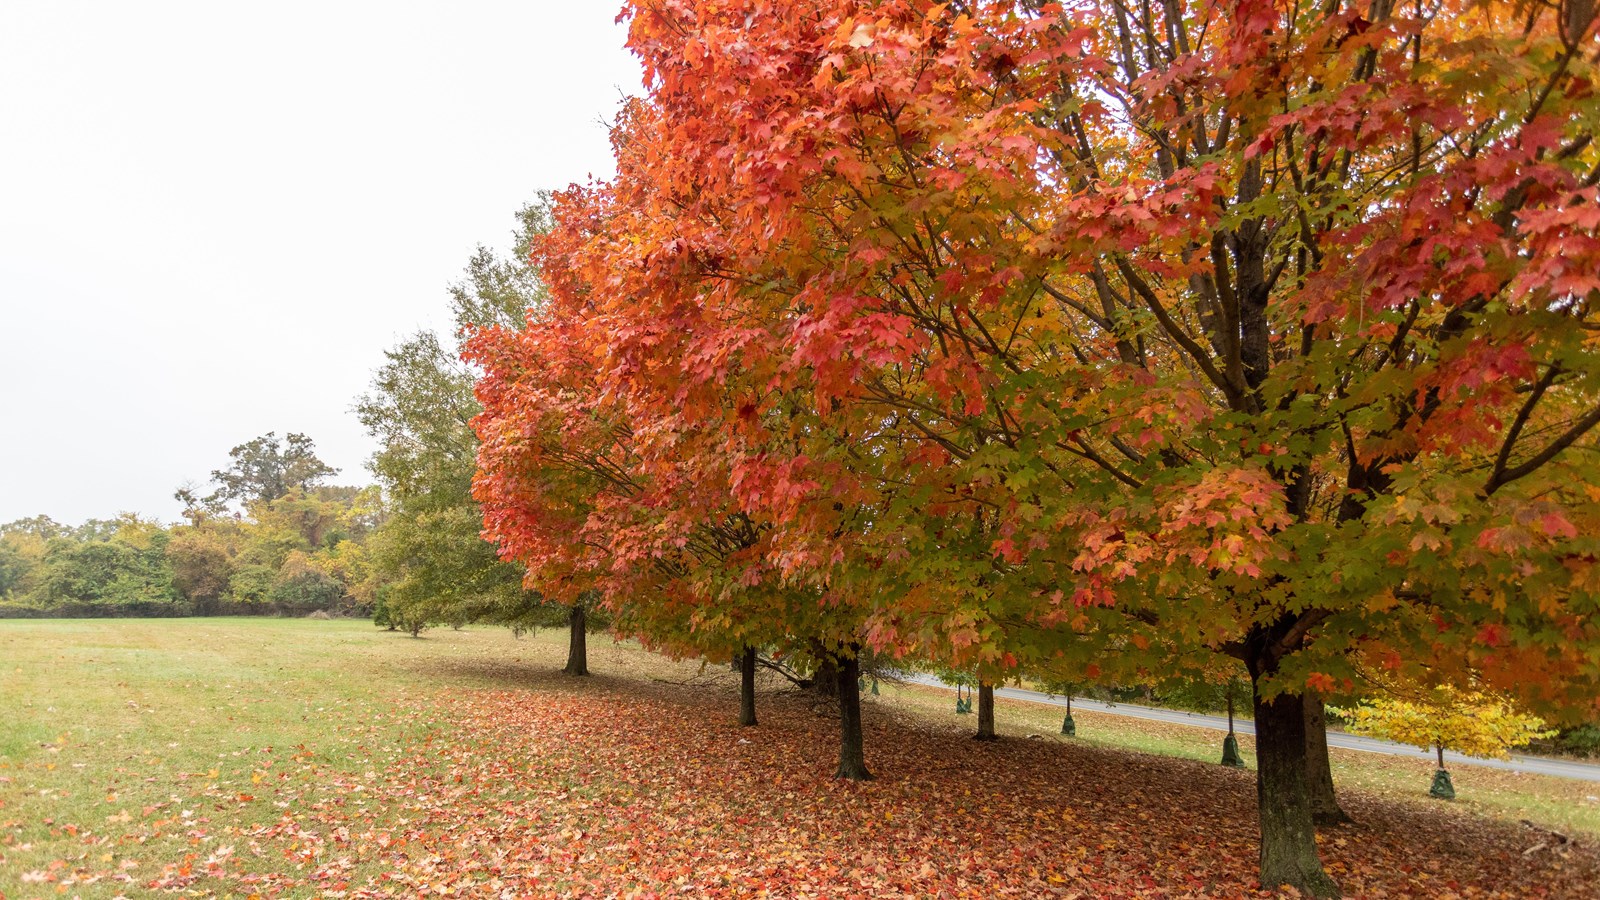 Trees turning colors in front of a grassy field. 